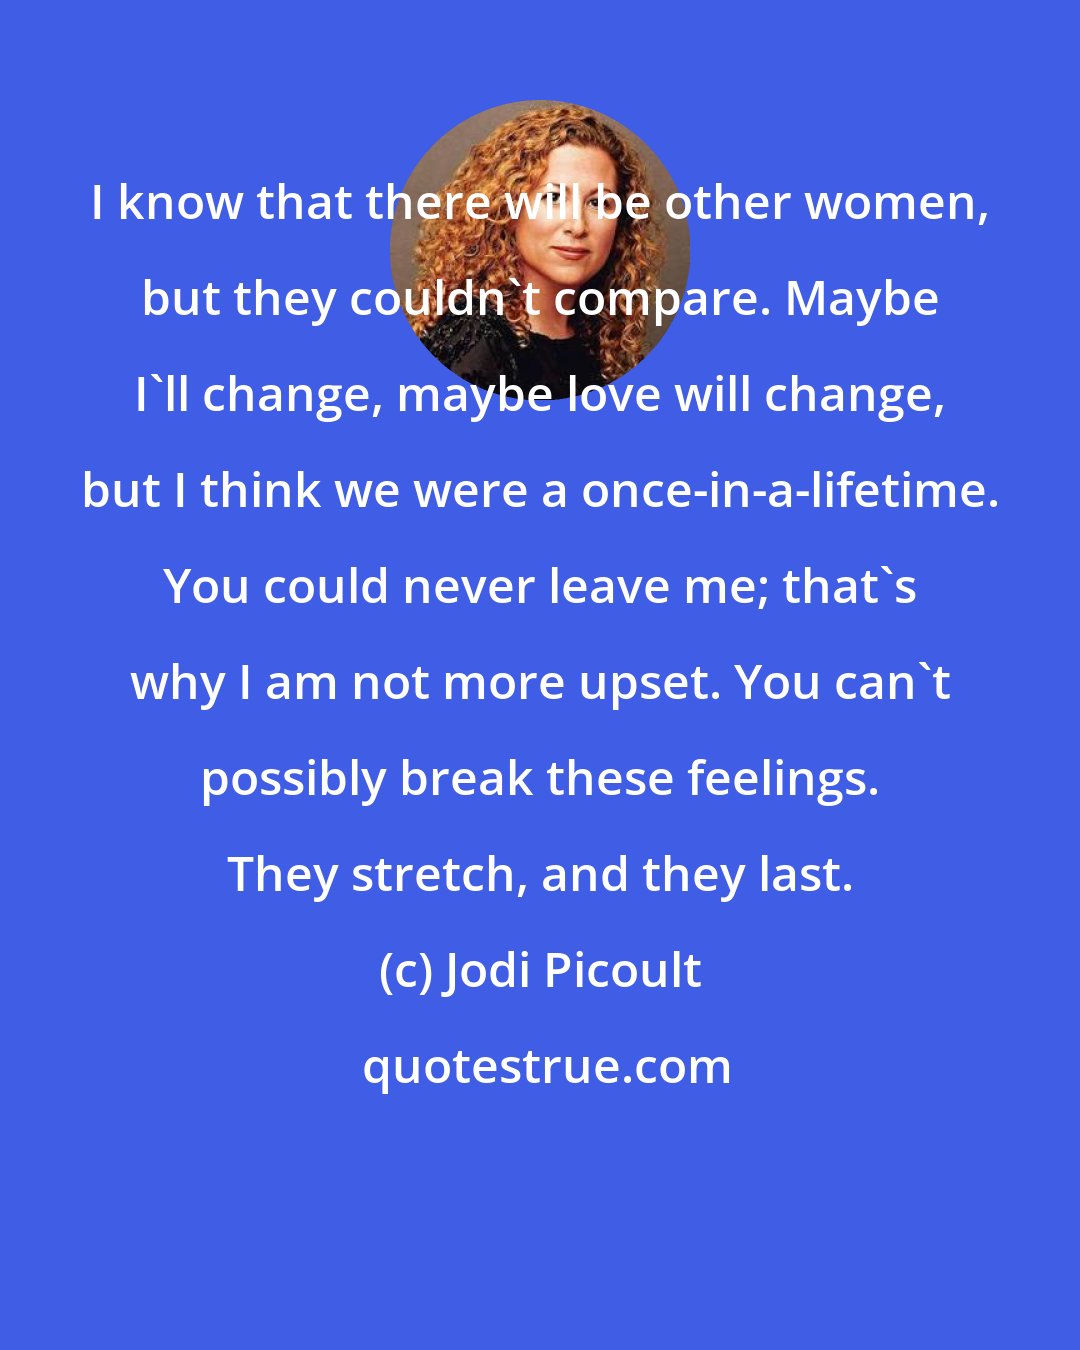 Jodi Picoult: I know that there will be other women, but they couldn't compare. Maybe I'll change, maybe love will change, but I think we were a once-in-a-lifetime. You could never leave me; that's why I am not more upset. You can't possibly break these feelings. They stretch, and they last.